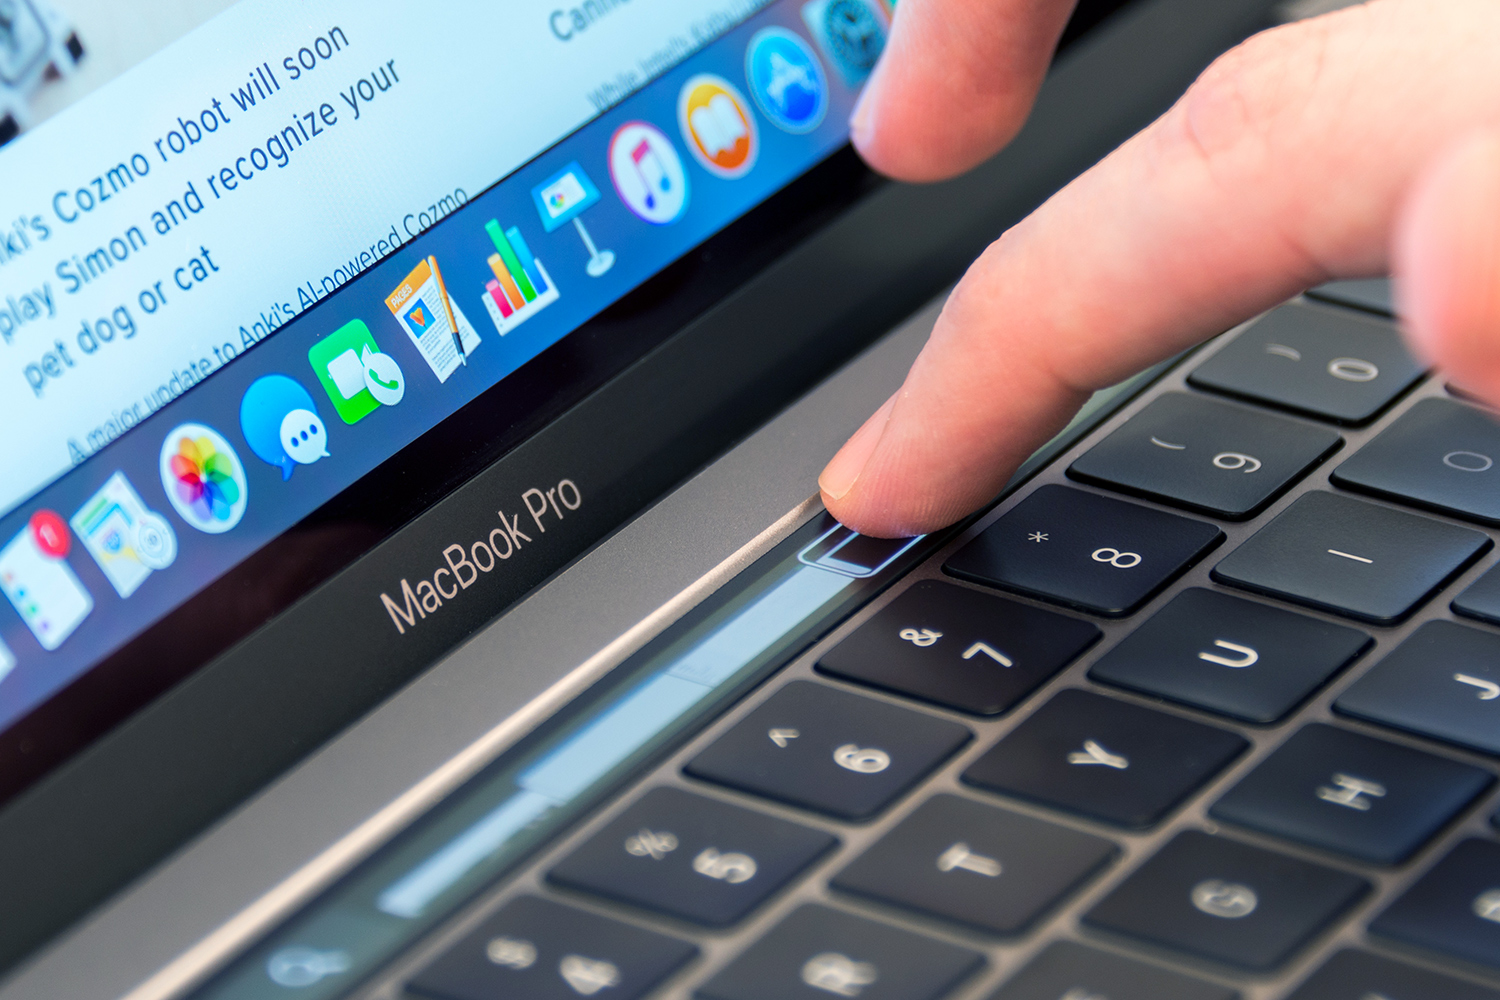 Apple MacBook 2016 refresh: Everything you need to know